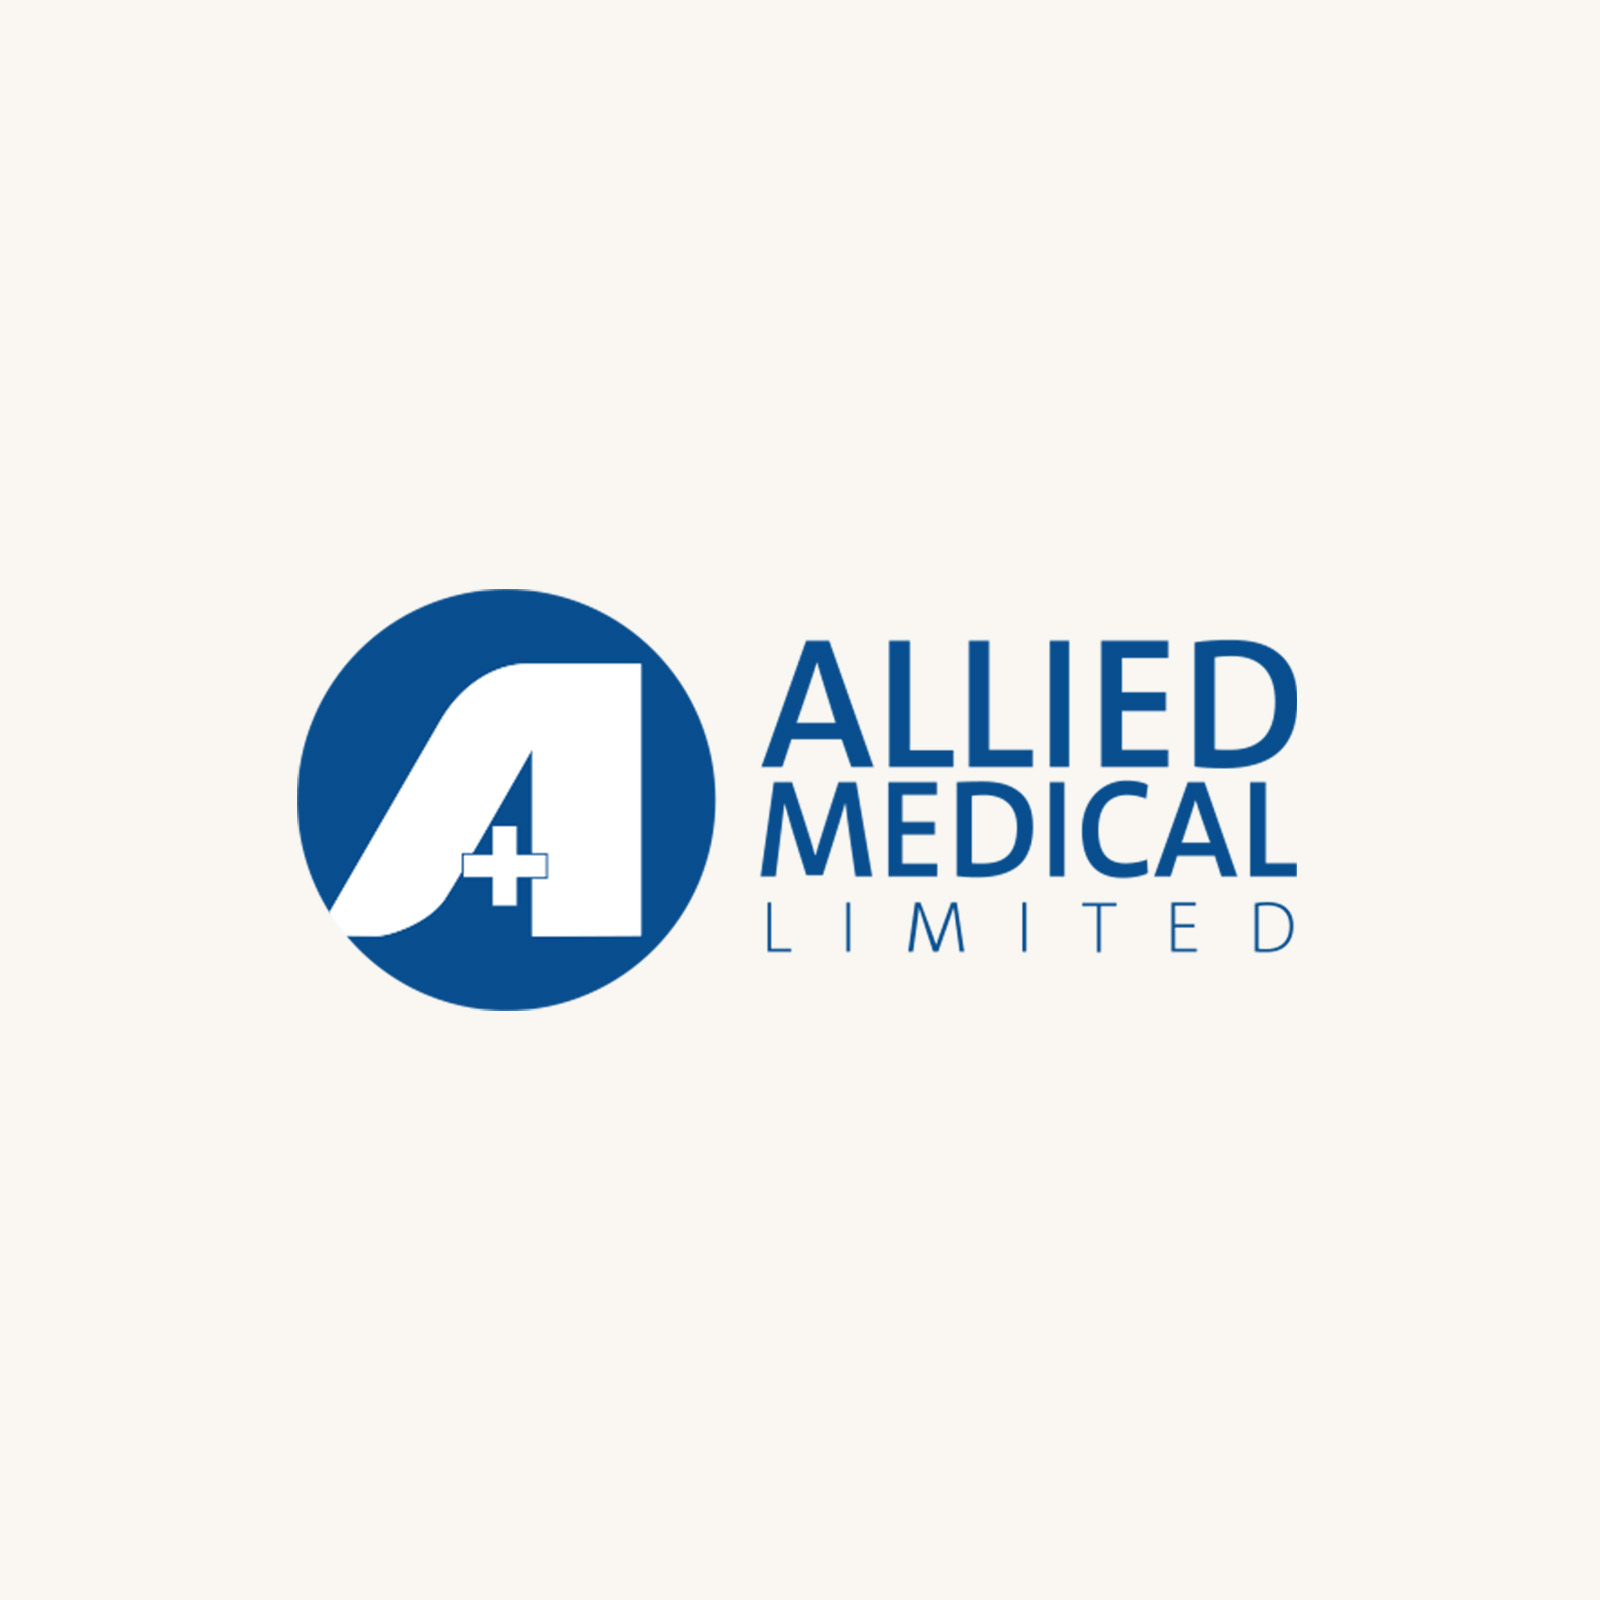 Mark Grigor appointed as Operations Manager at Allied Medical.